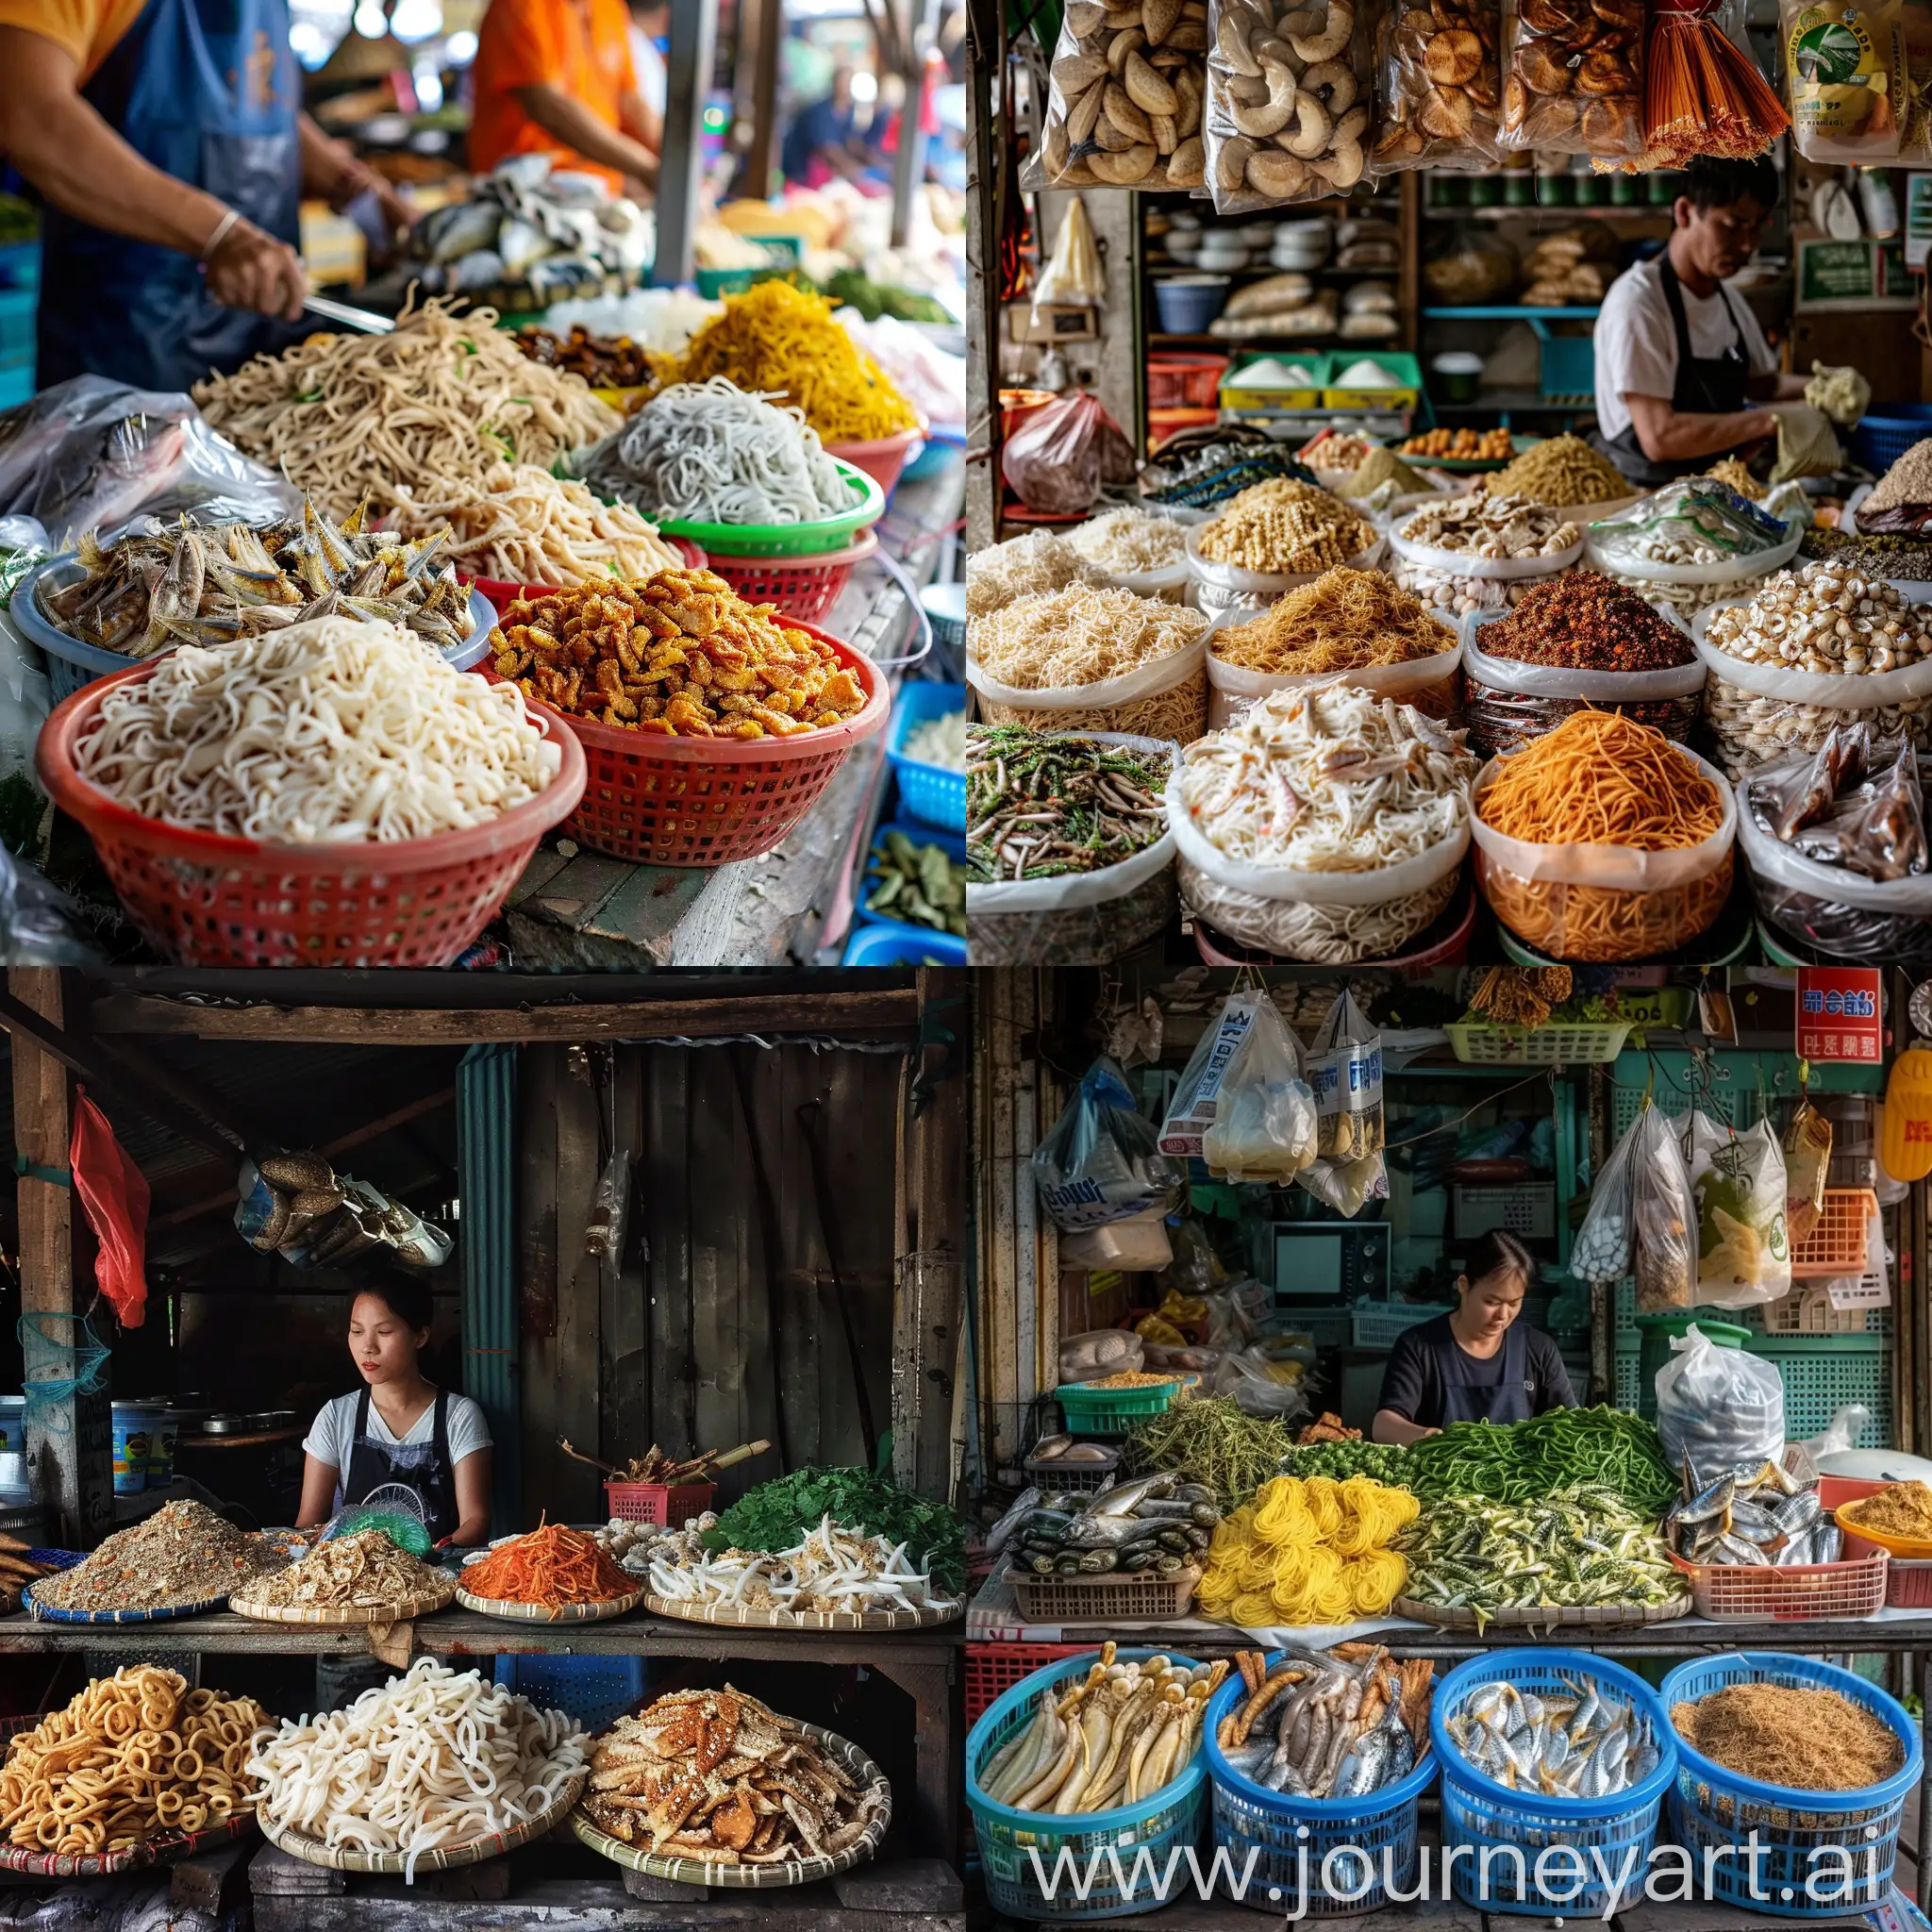 Arrange noodles, dried fish and vegetables together on a shop table with a vendor photo ratio 6:19